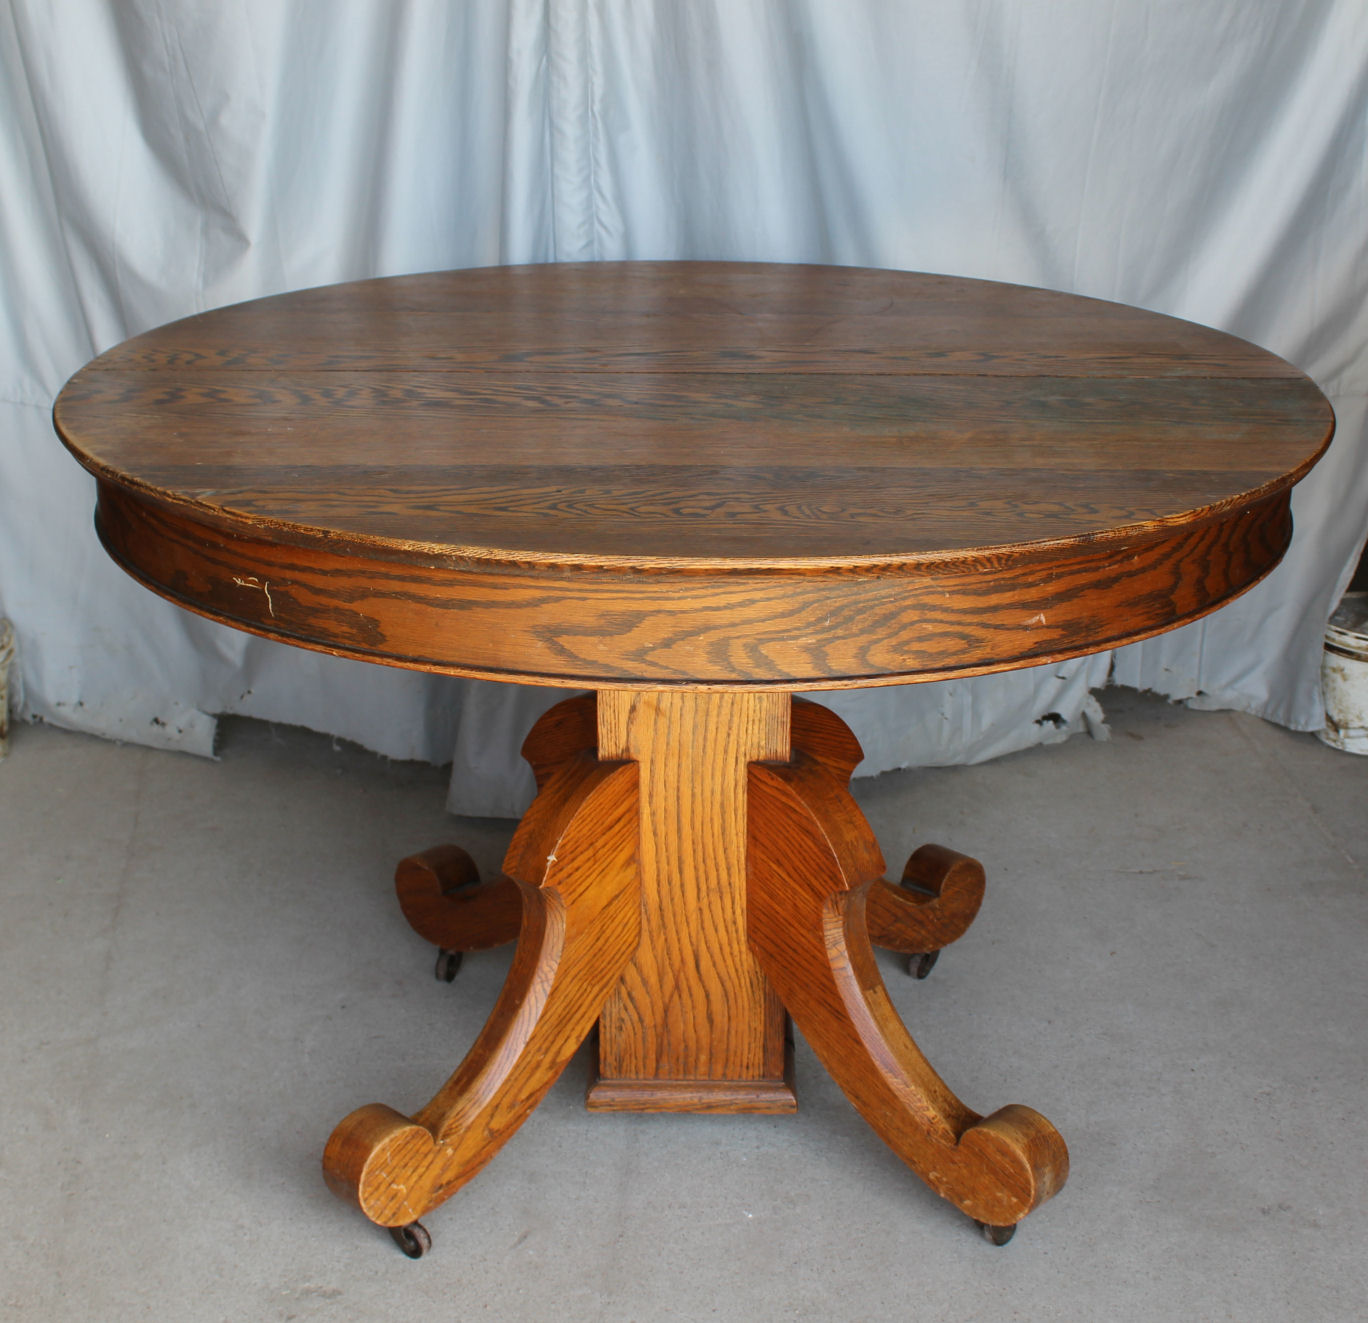 Antique Round Oak Dining Table, Vintage Round Oak Table And Chairs